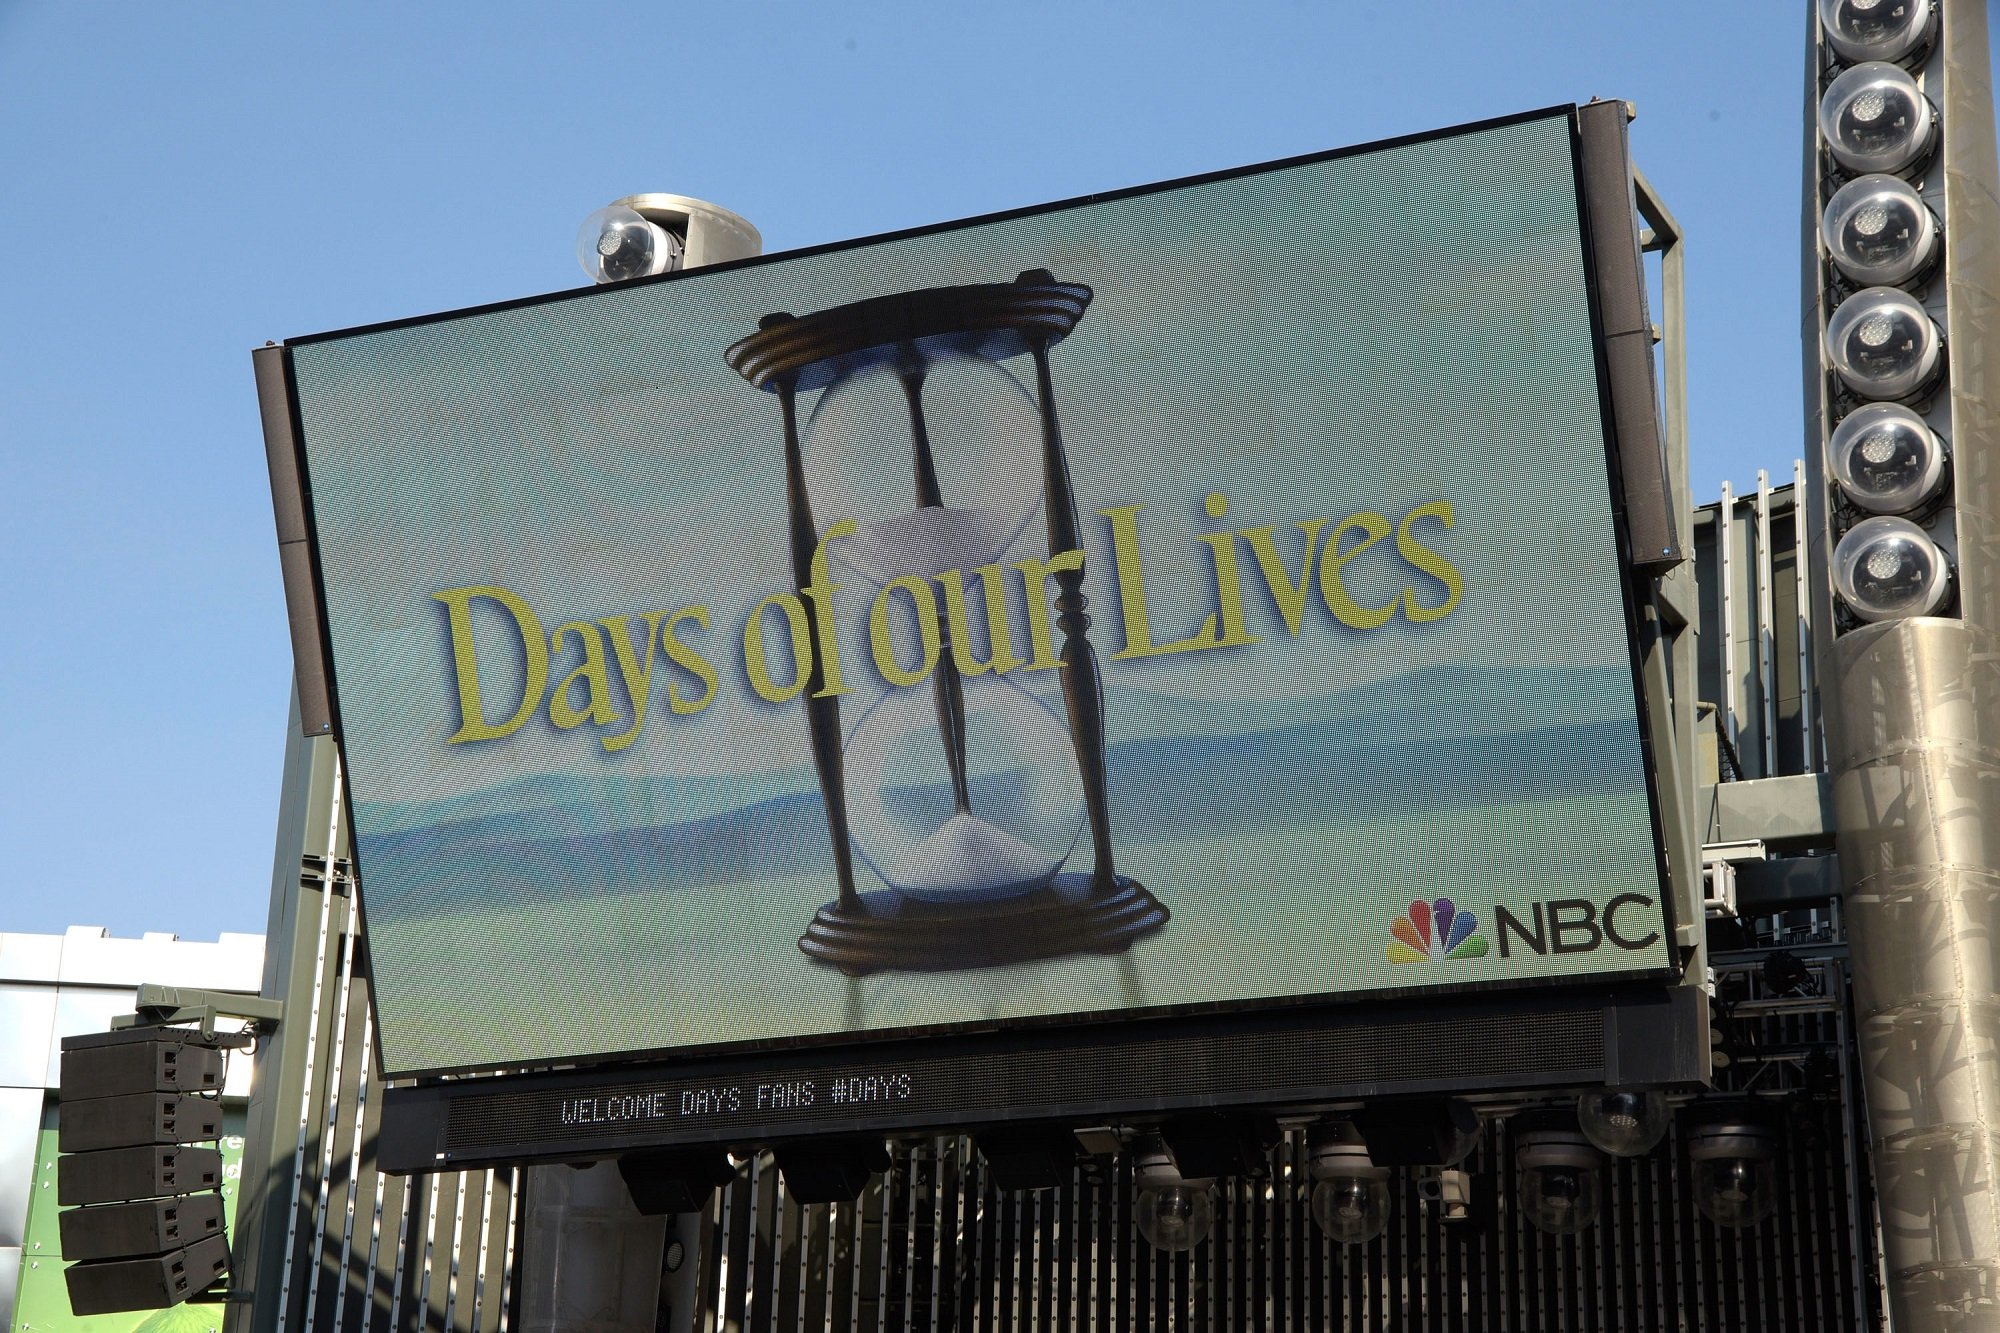 Days of Our Lives pre-empted